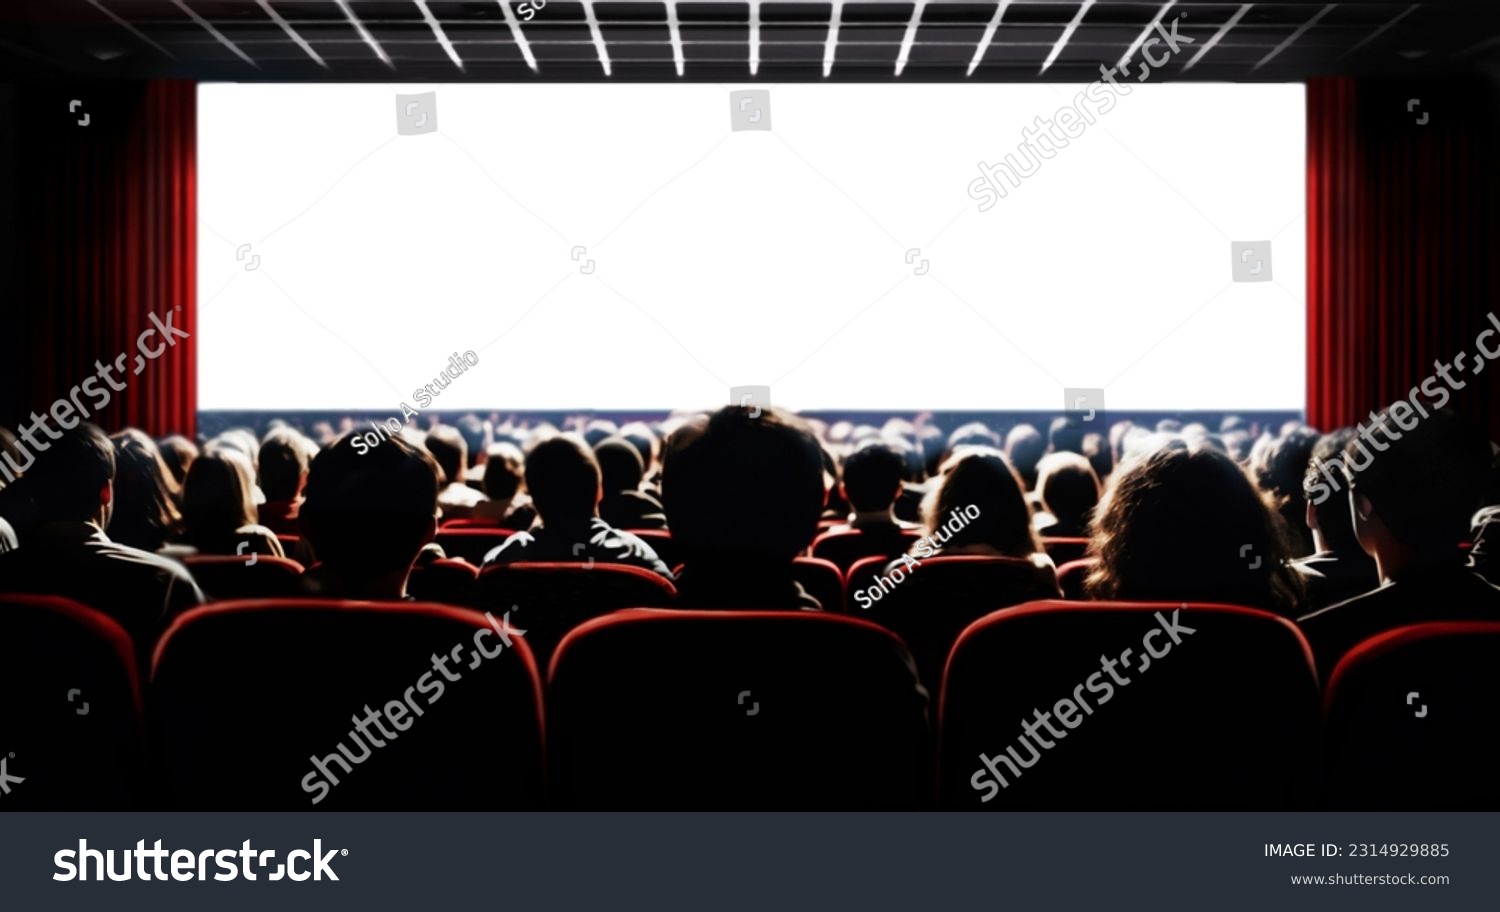 Cinema blank wide screen and people in red chairs in the cinema hall. Blurred People silhouettes watching movie performance. #2314929885